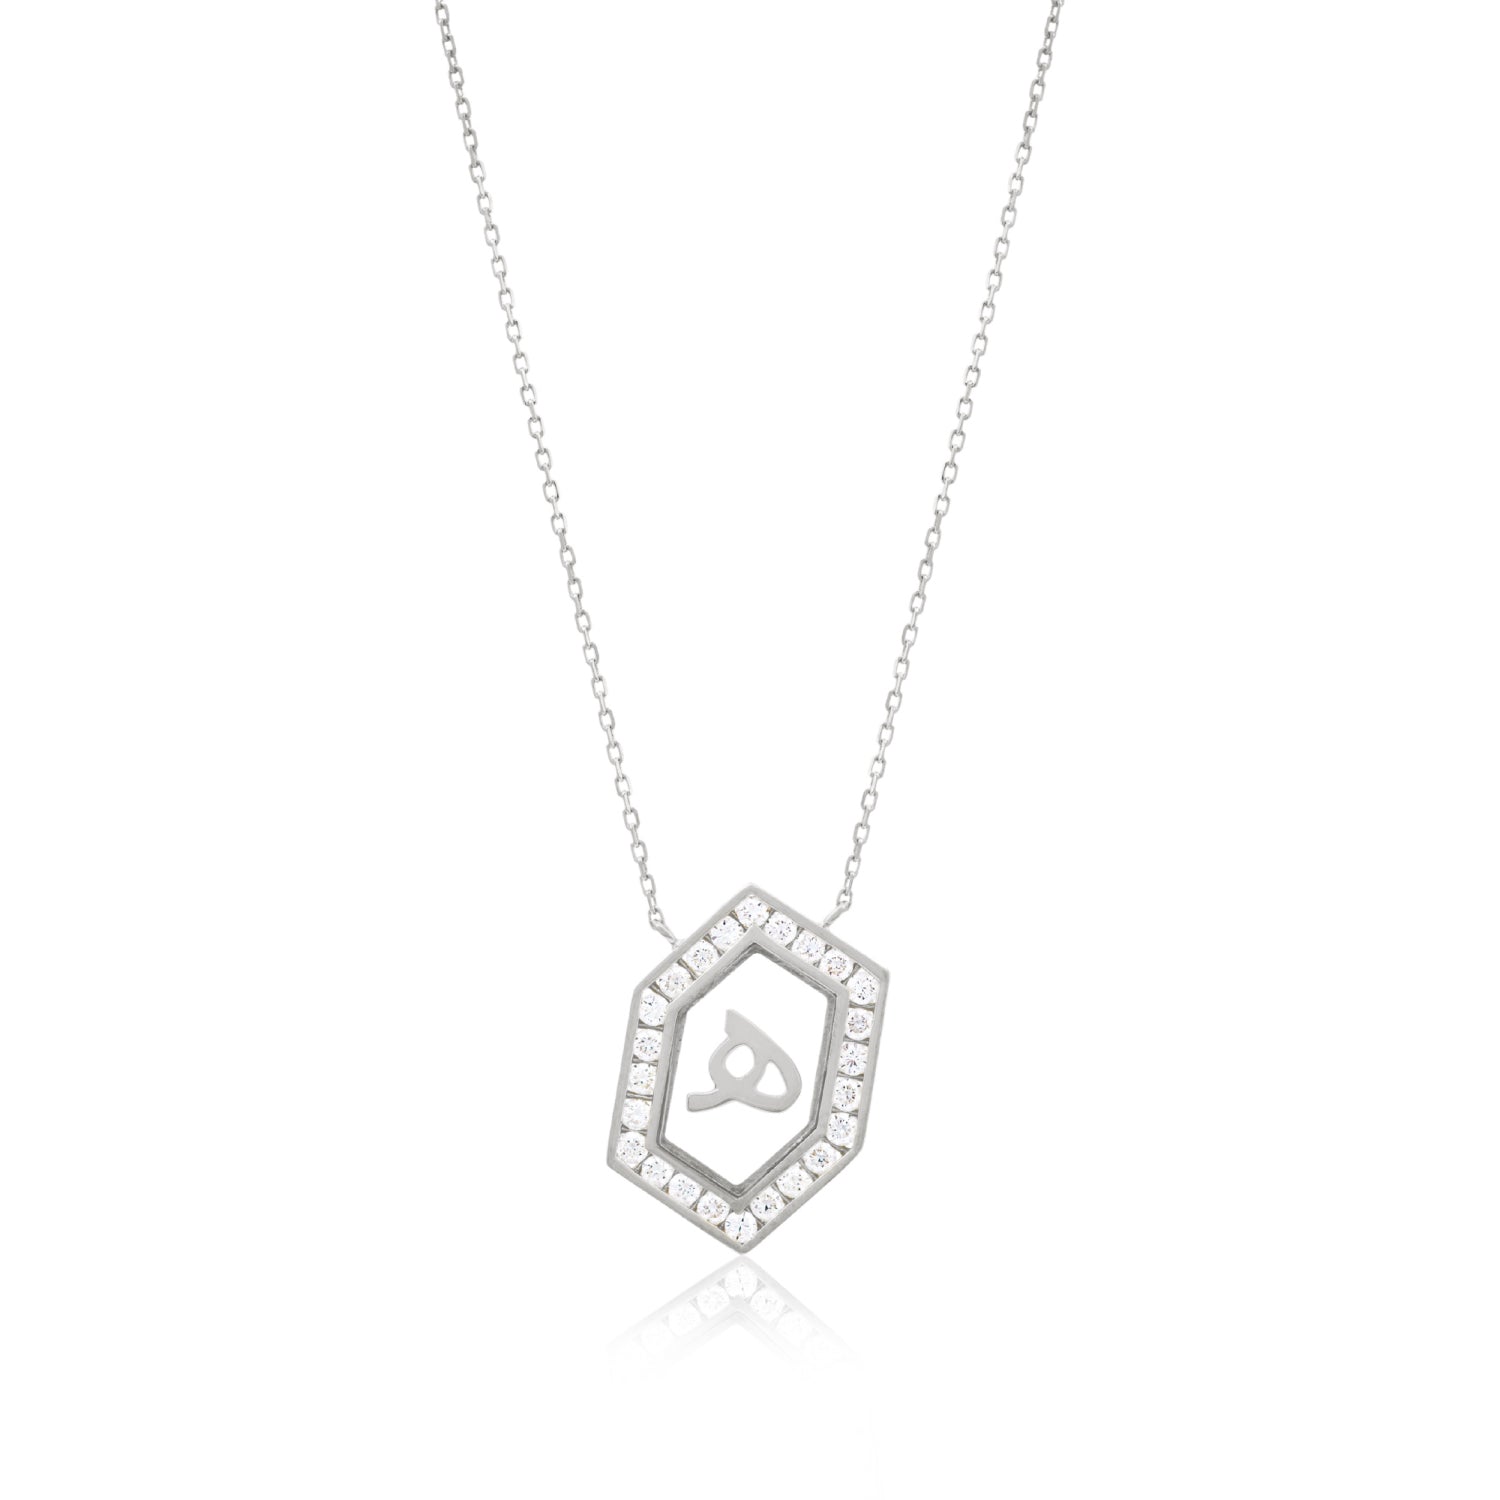 Qamoos 1.0 Letter هـ Diamond Necklace in White Gold